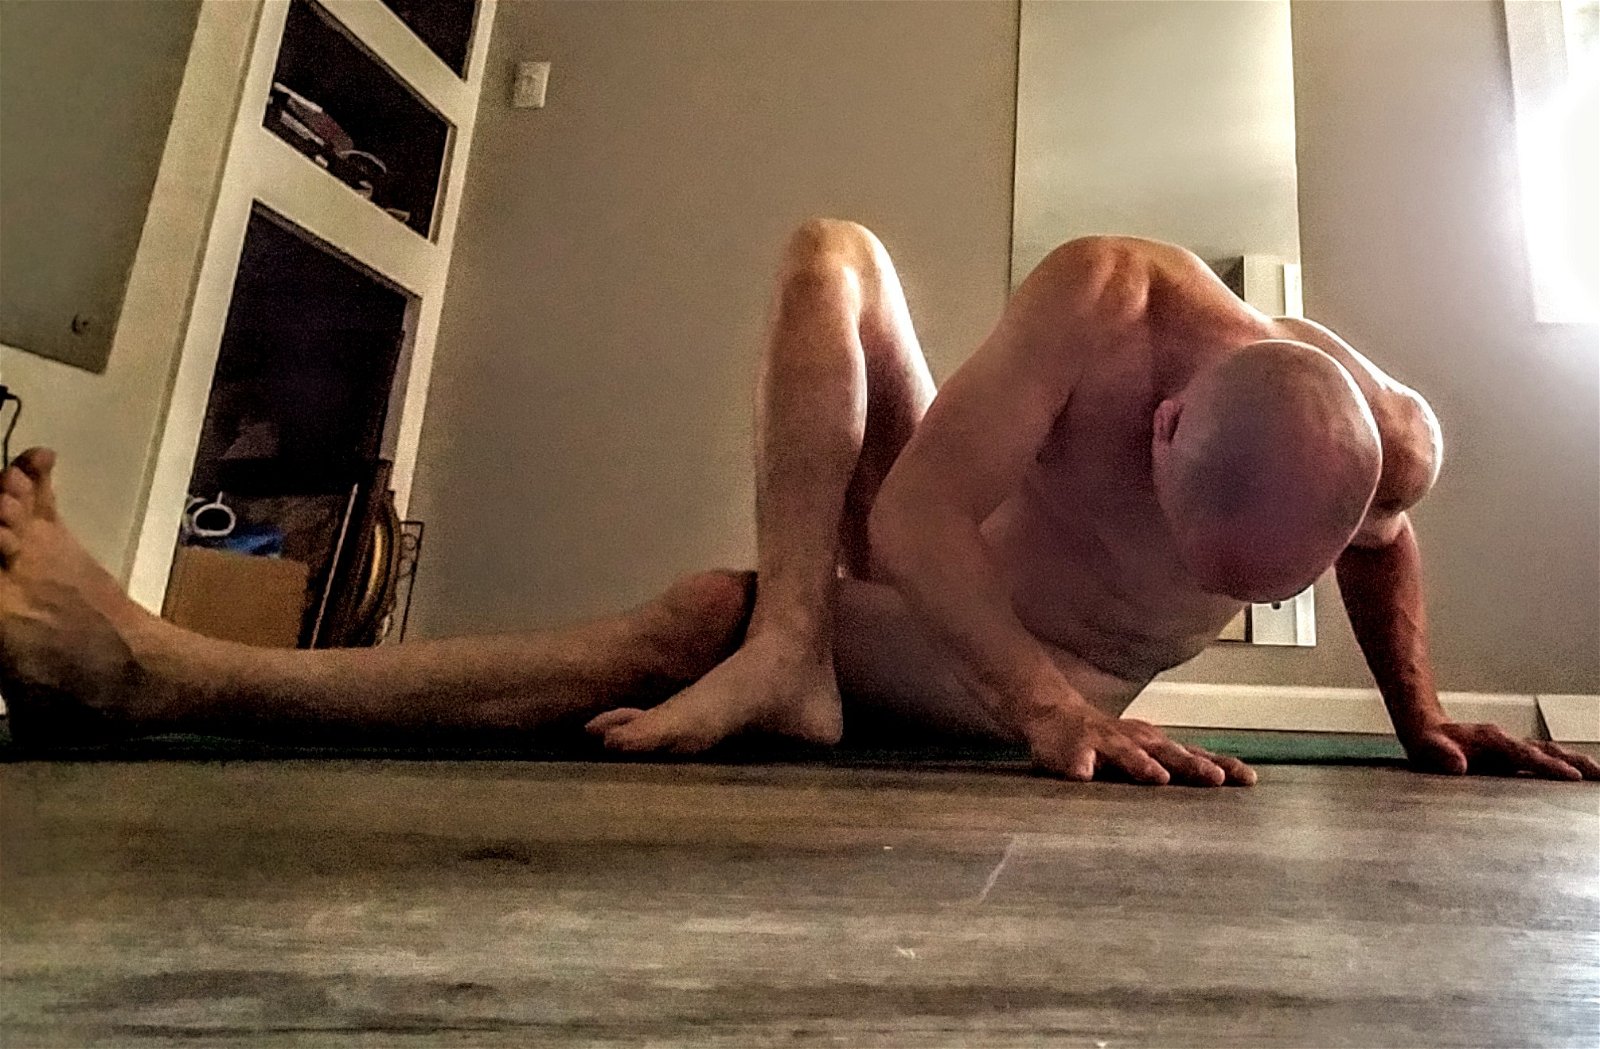 Photo by ArtOfNakedYoga with the username @ArtOfNakedYoga, who is a verified user,  December 13, 2018 at 12:52 AM. The post is about the topic Yoga in the nude and the text says '#yoga #me #nudeyoga #nakedyoga'